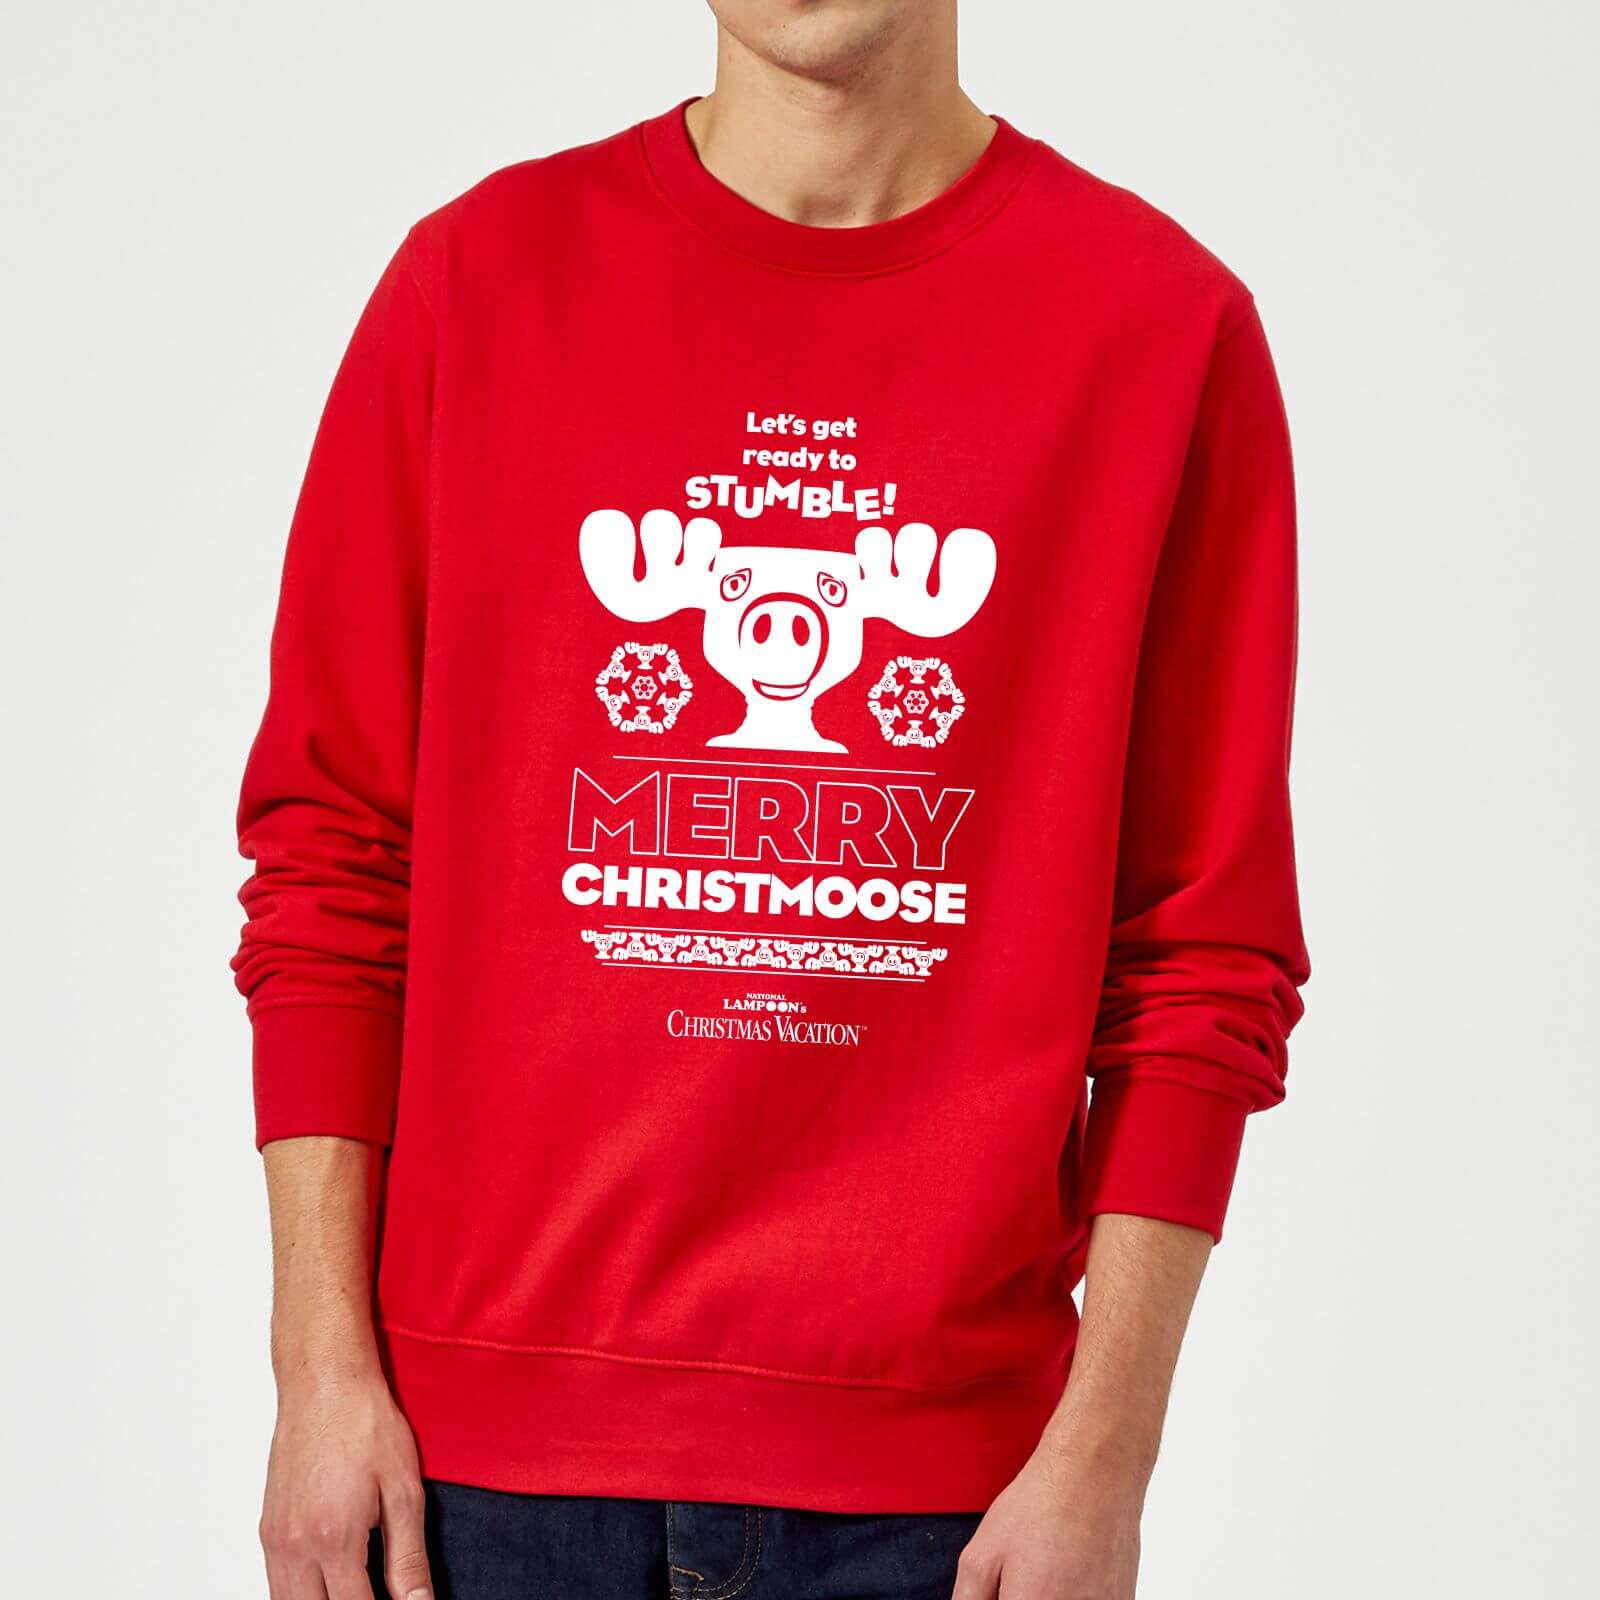 National Lampoon Merry Christmoose Christmas Jumper - Red - M